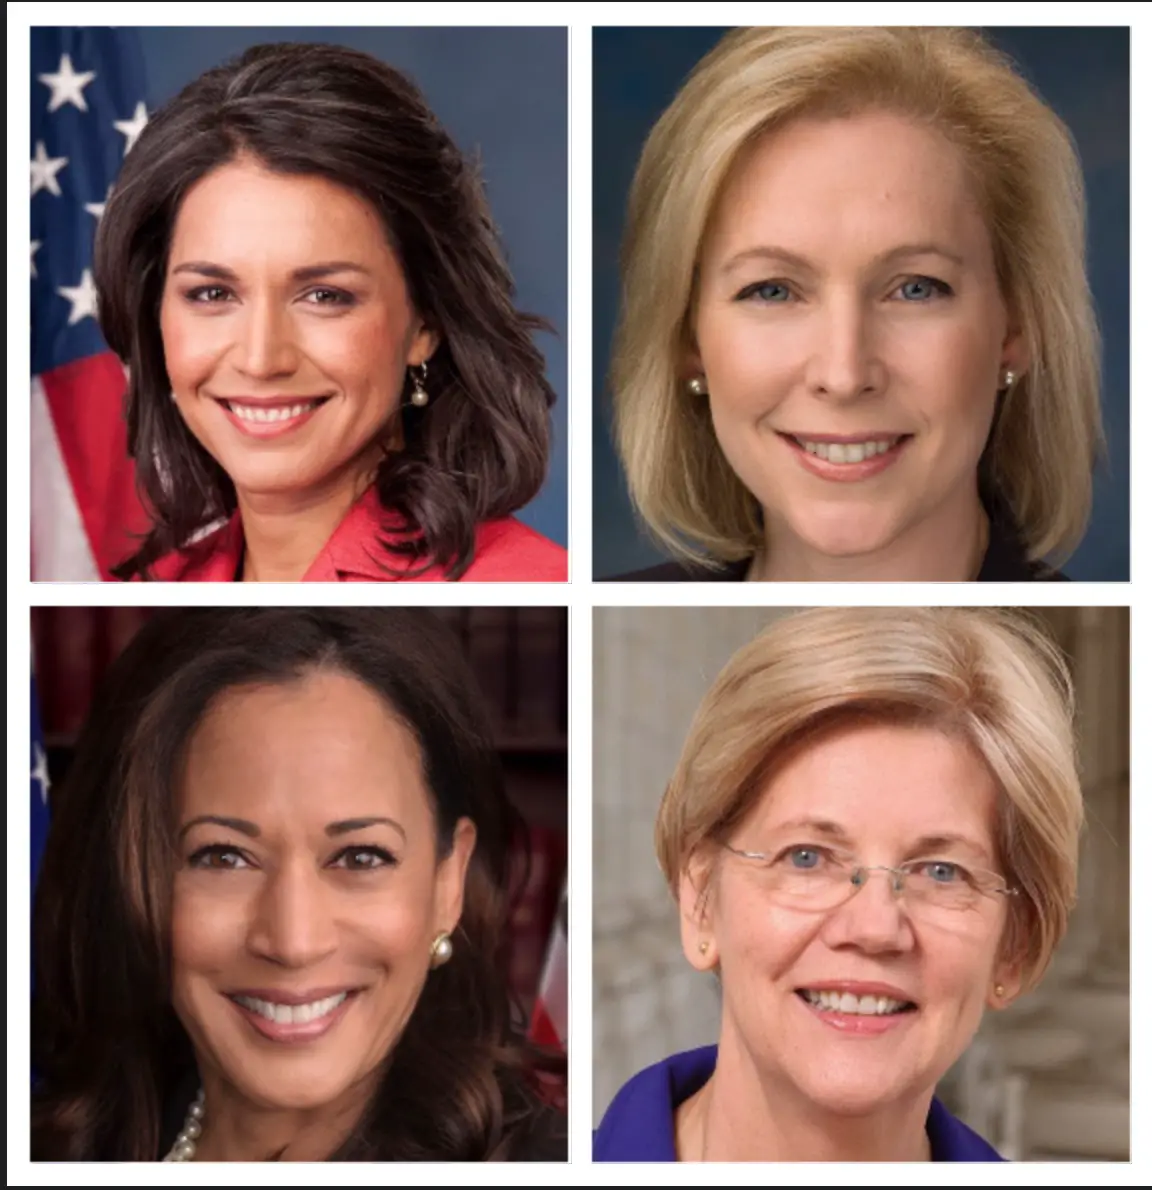 The case for an all female Democratic ticket in 2020